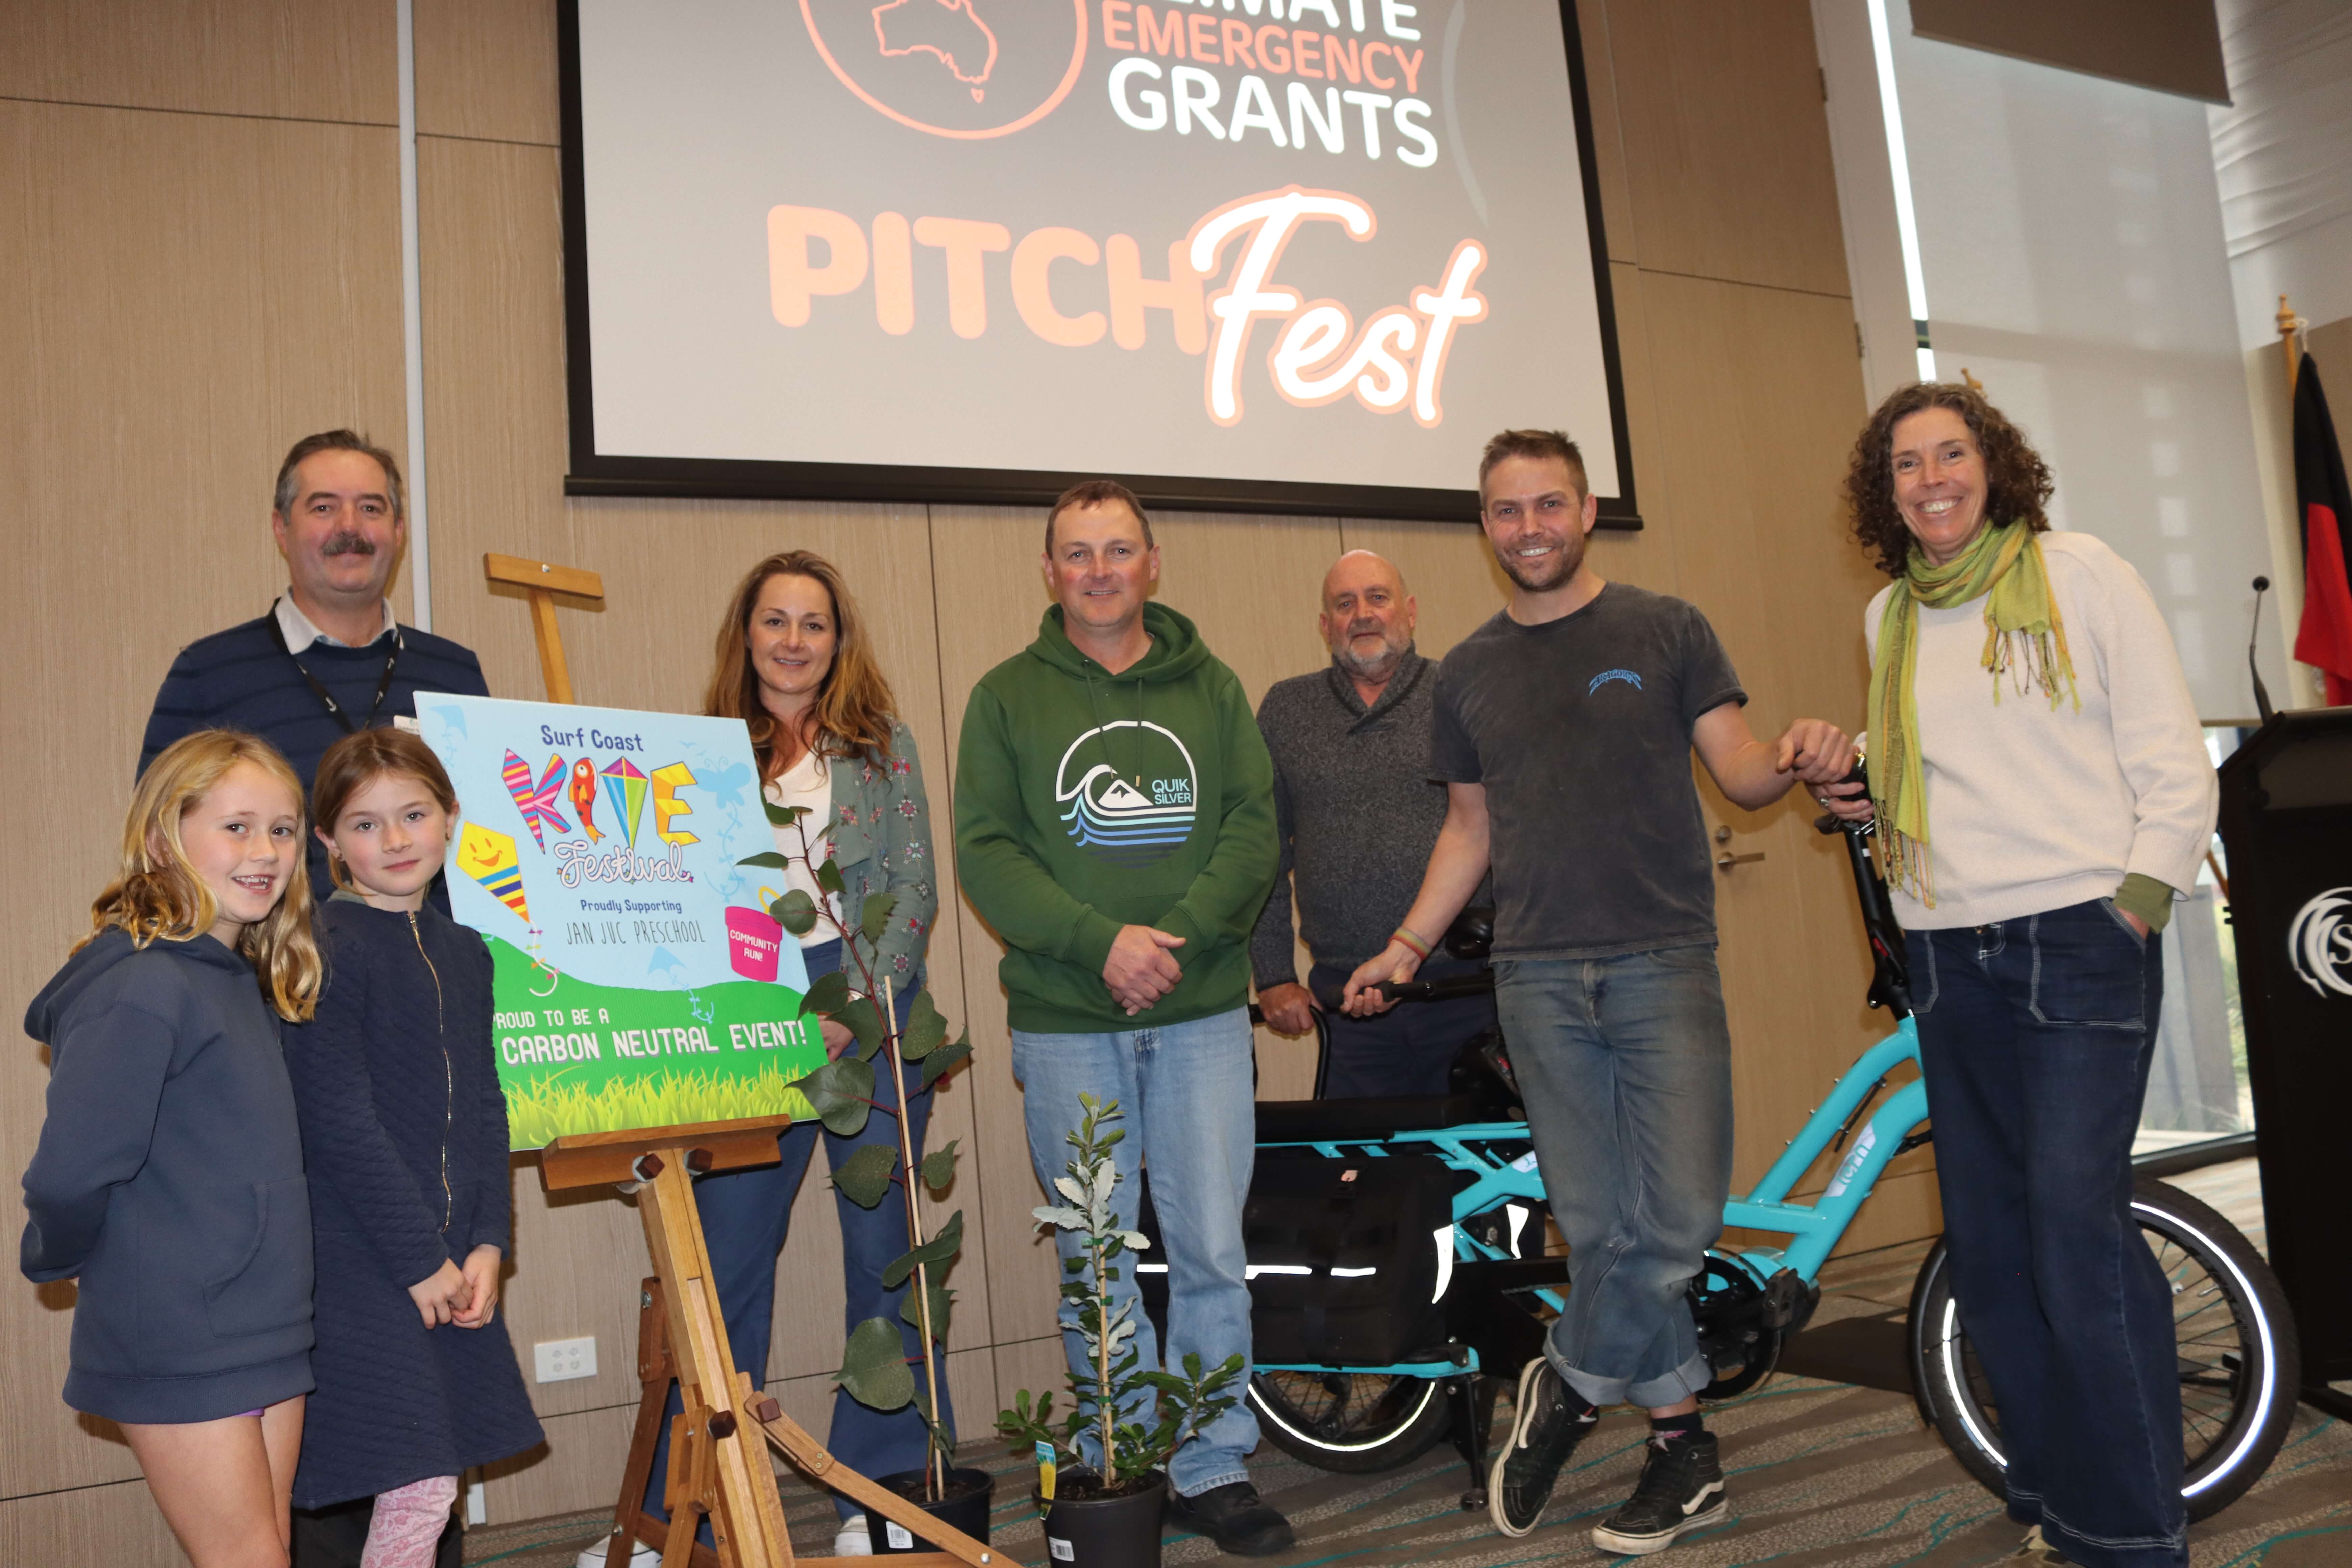 Climate Emergency Grants: Pitch Fest Winners Announced!